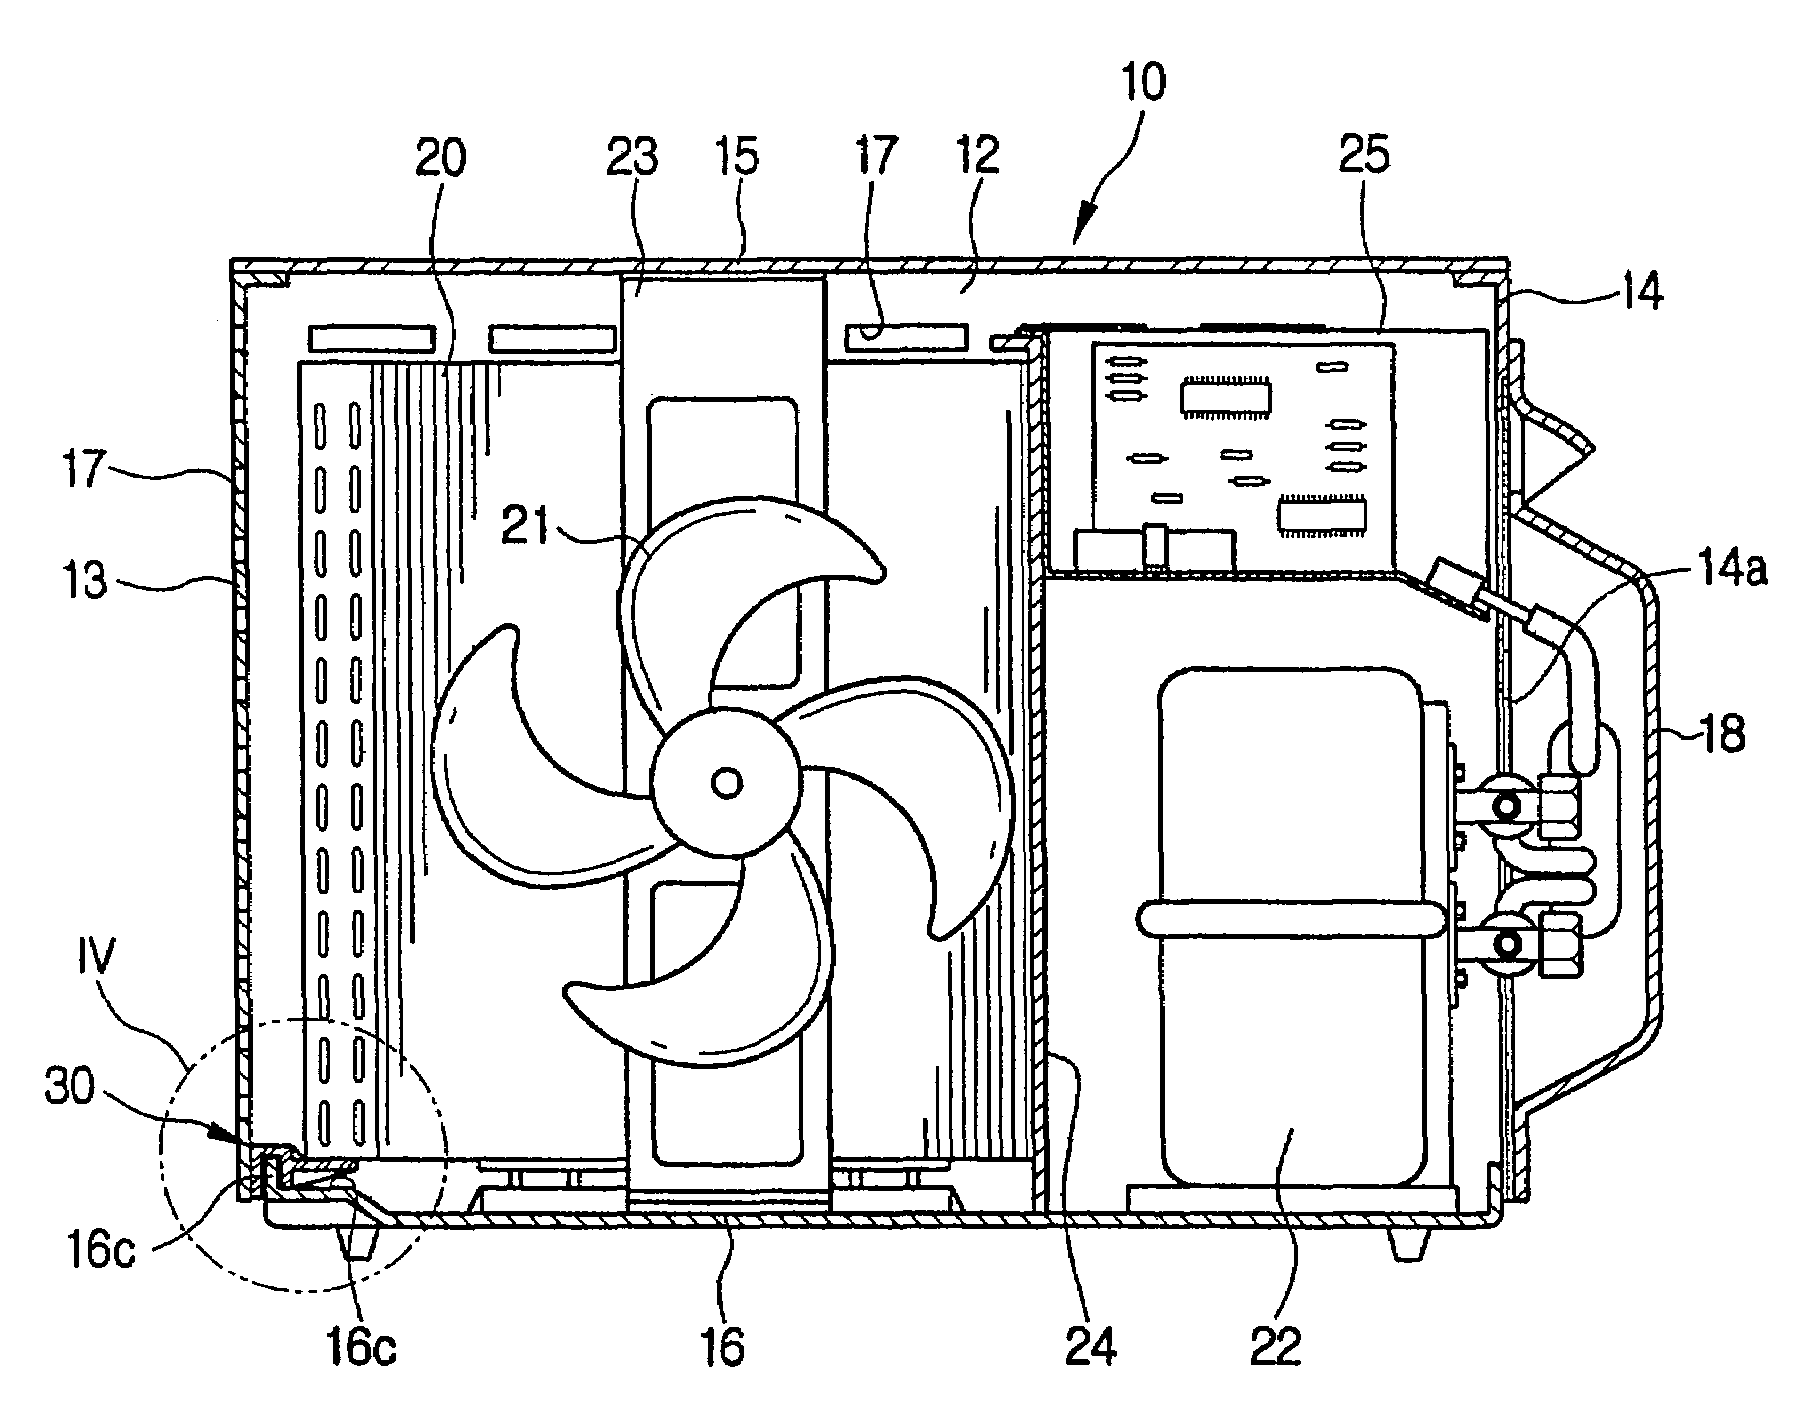 Outdoor unit for air conditioner